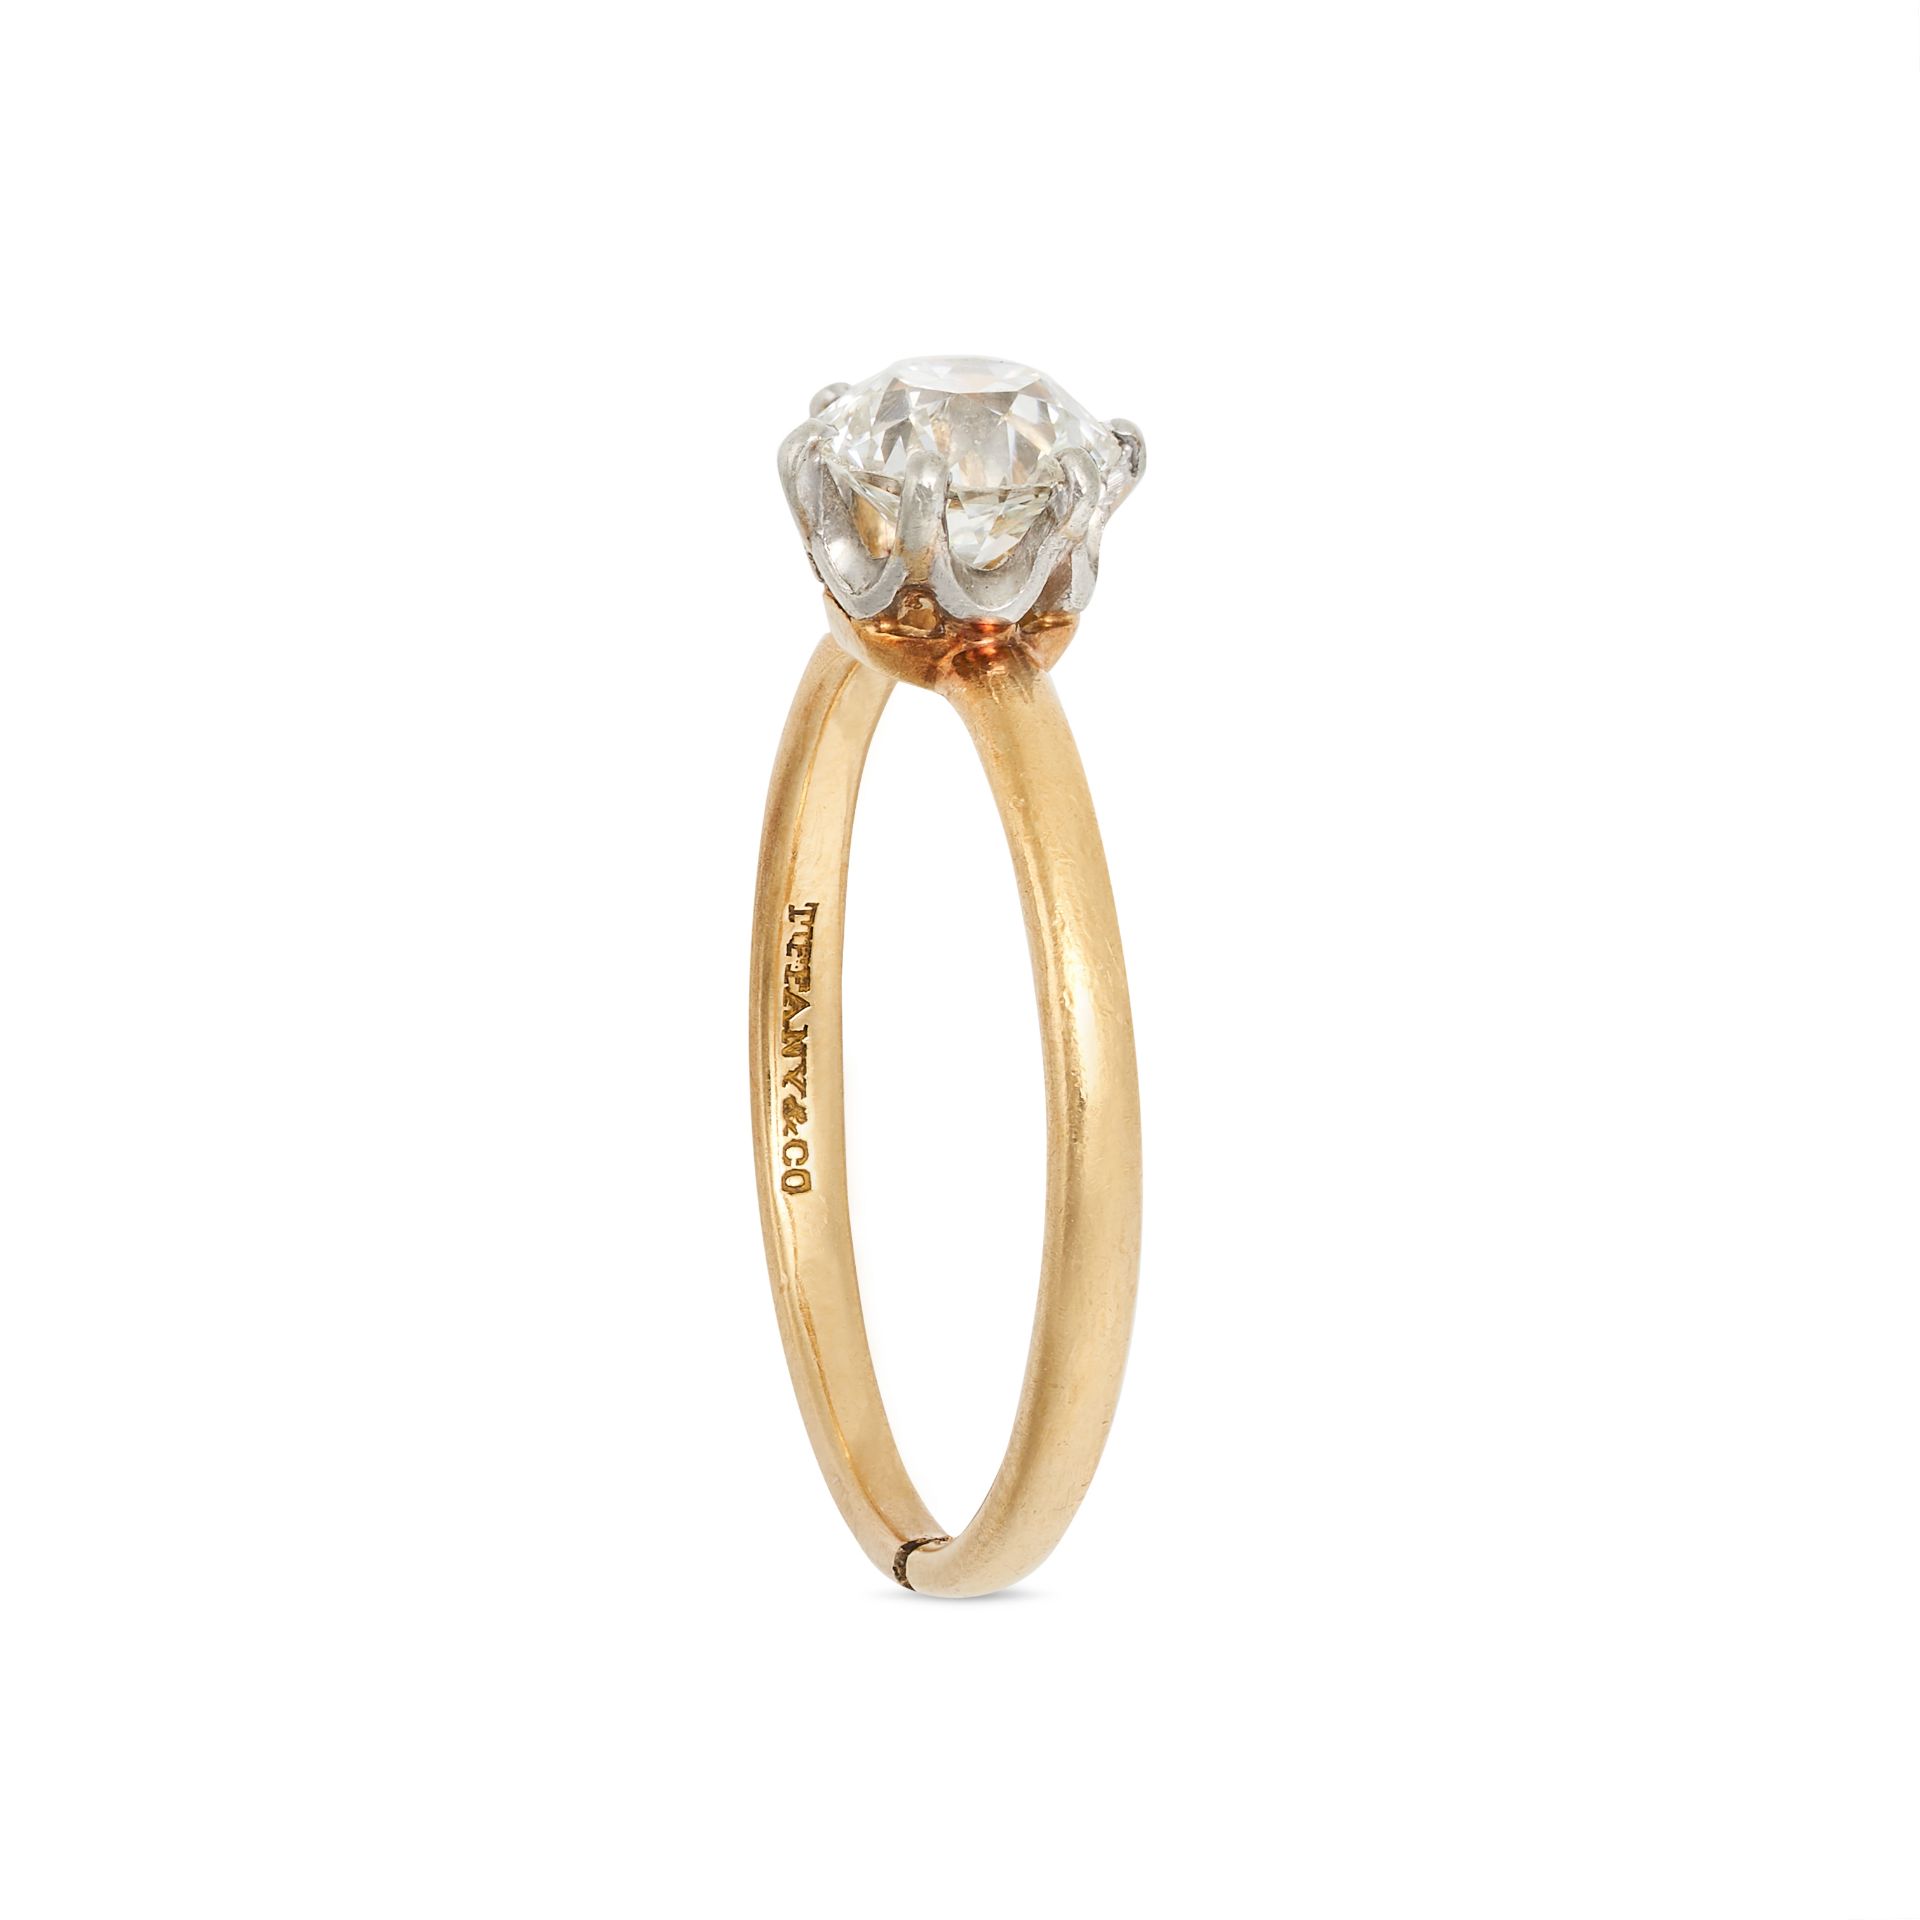 TIFFANY & CO., A VINTAGE SOLITAIRE DIAMOND RING in 18ct yellow gold, set with an old cut diamond ... - Bild 2 aus 2